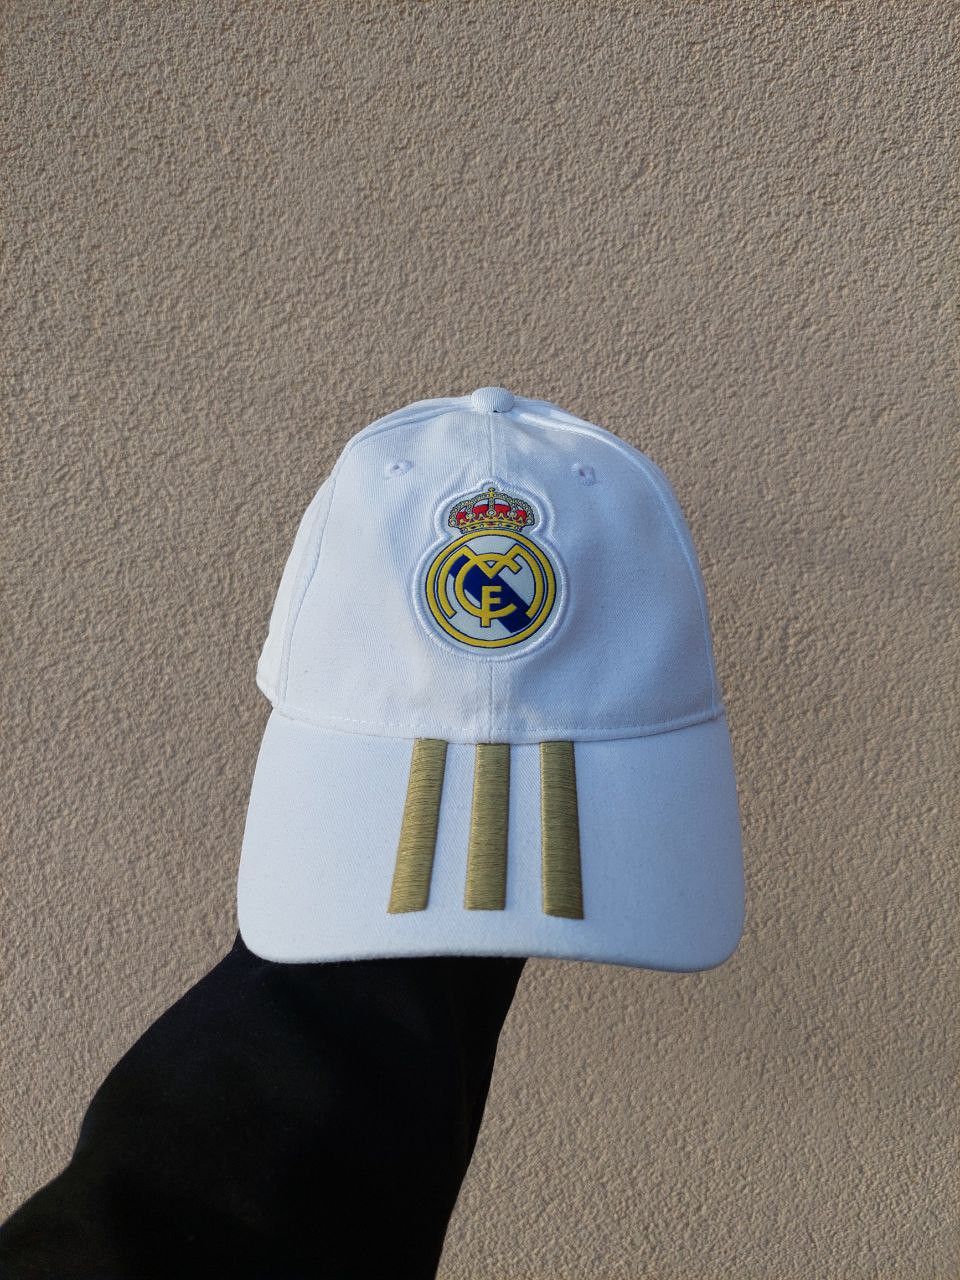 Pre-owned Adidas X Real Madrid Adidas Real Madrid Cap Hat Football Soccer Jersey In White